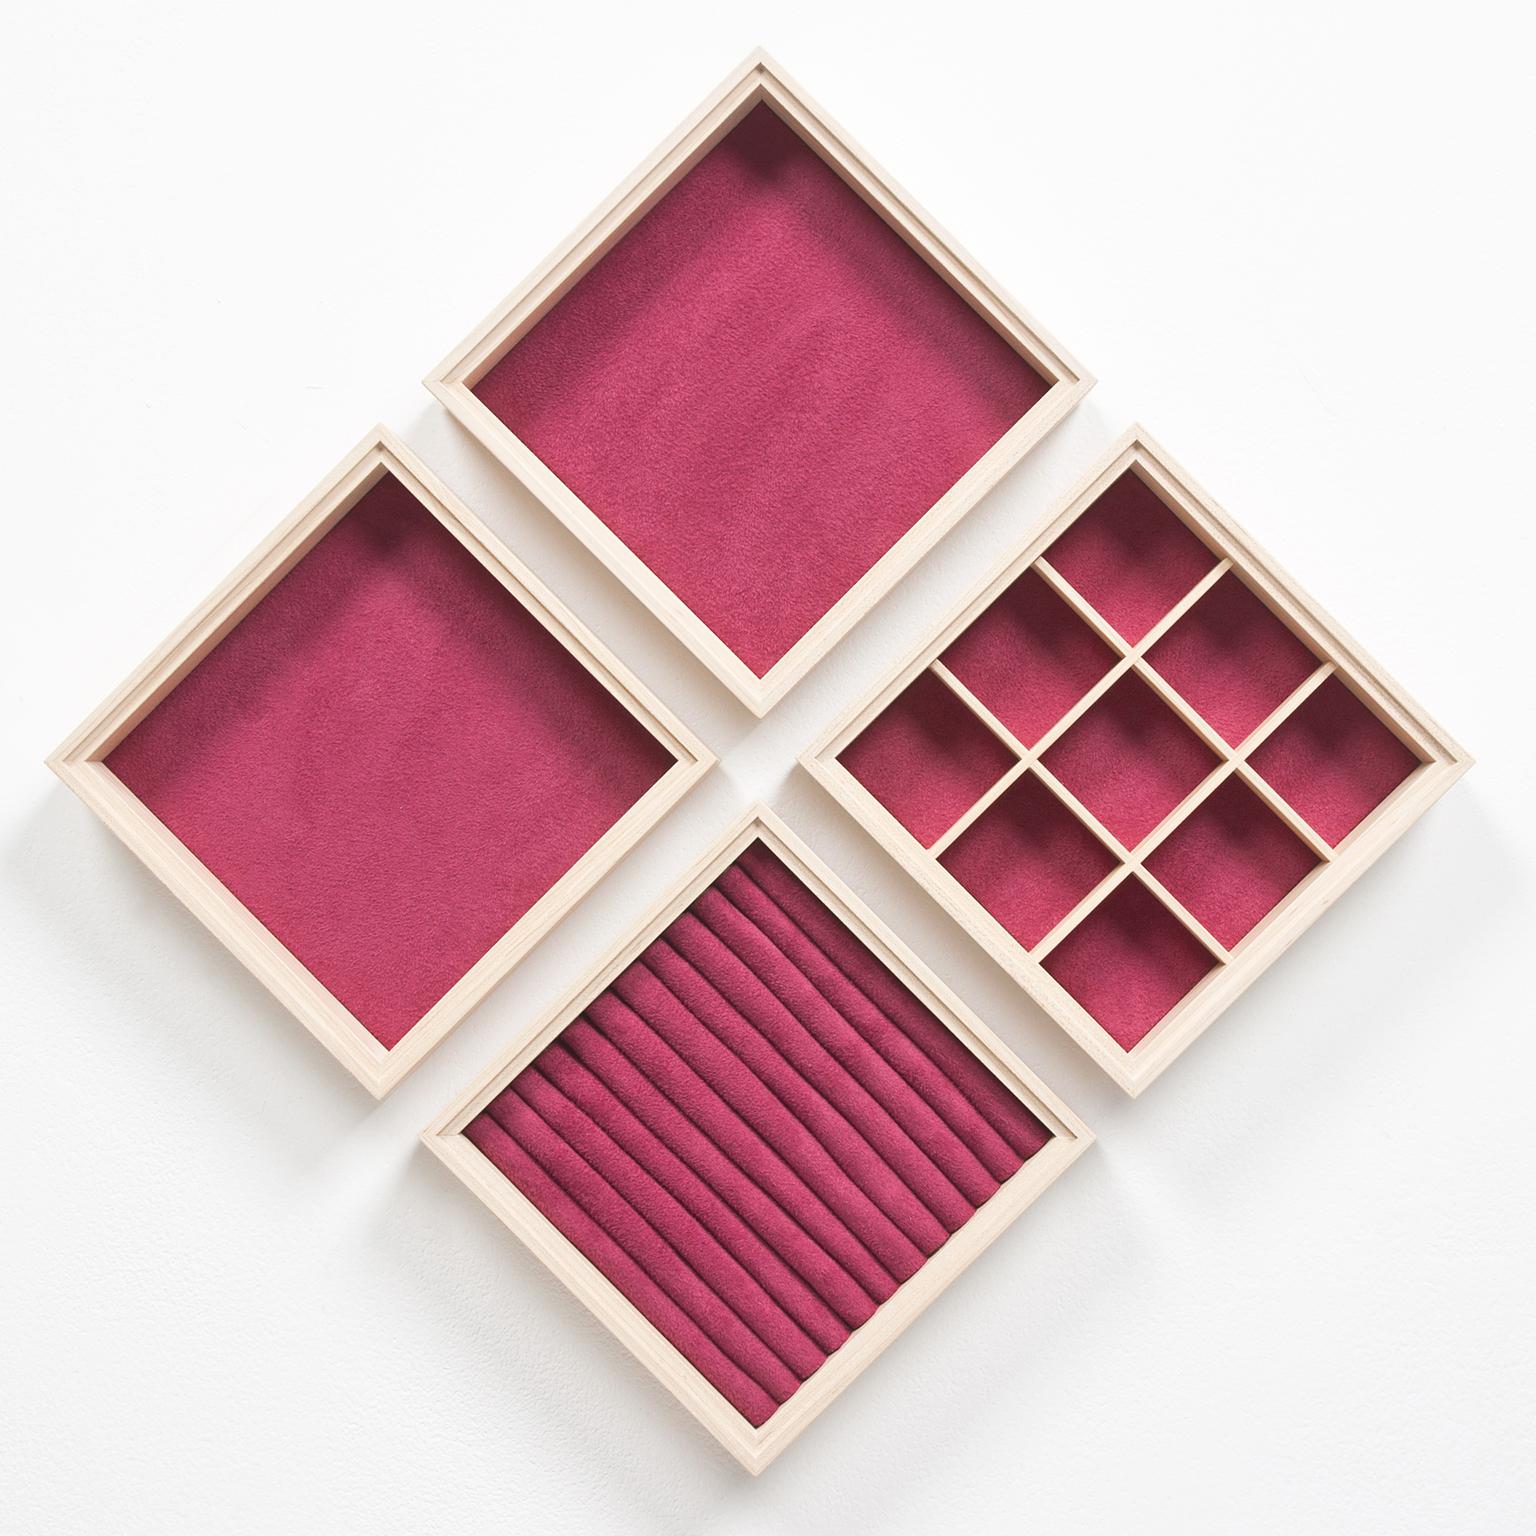 British Contemporary Cubed Jewellery Box made in Elm and Maple with Magenta Fabric For Sale